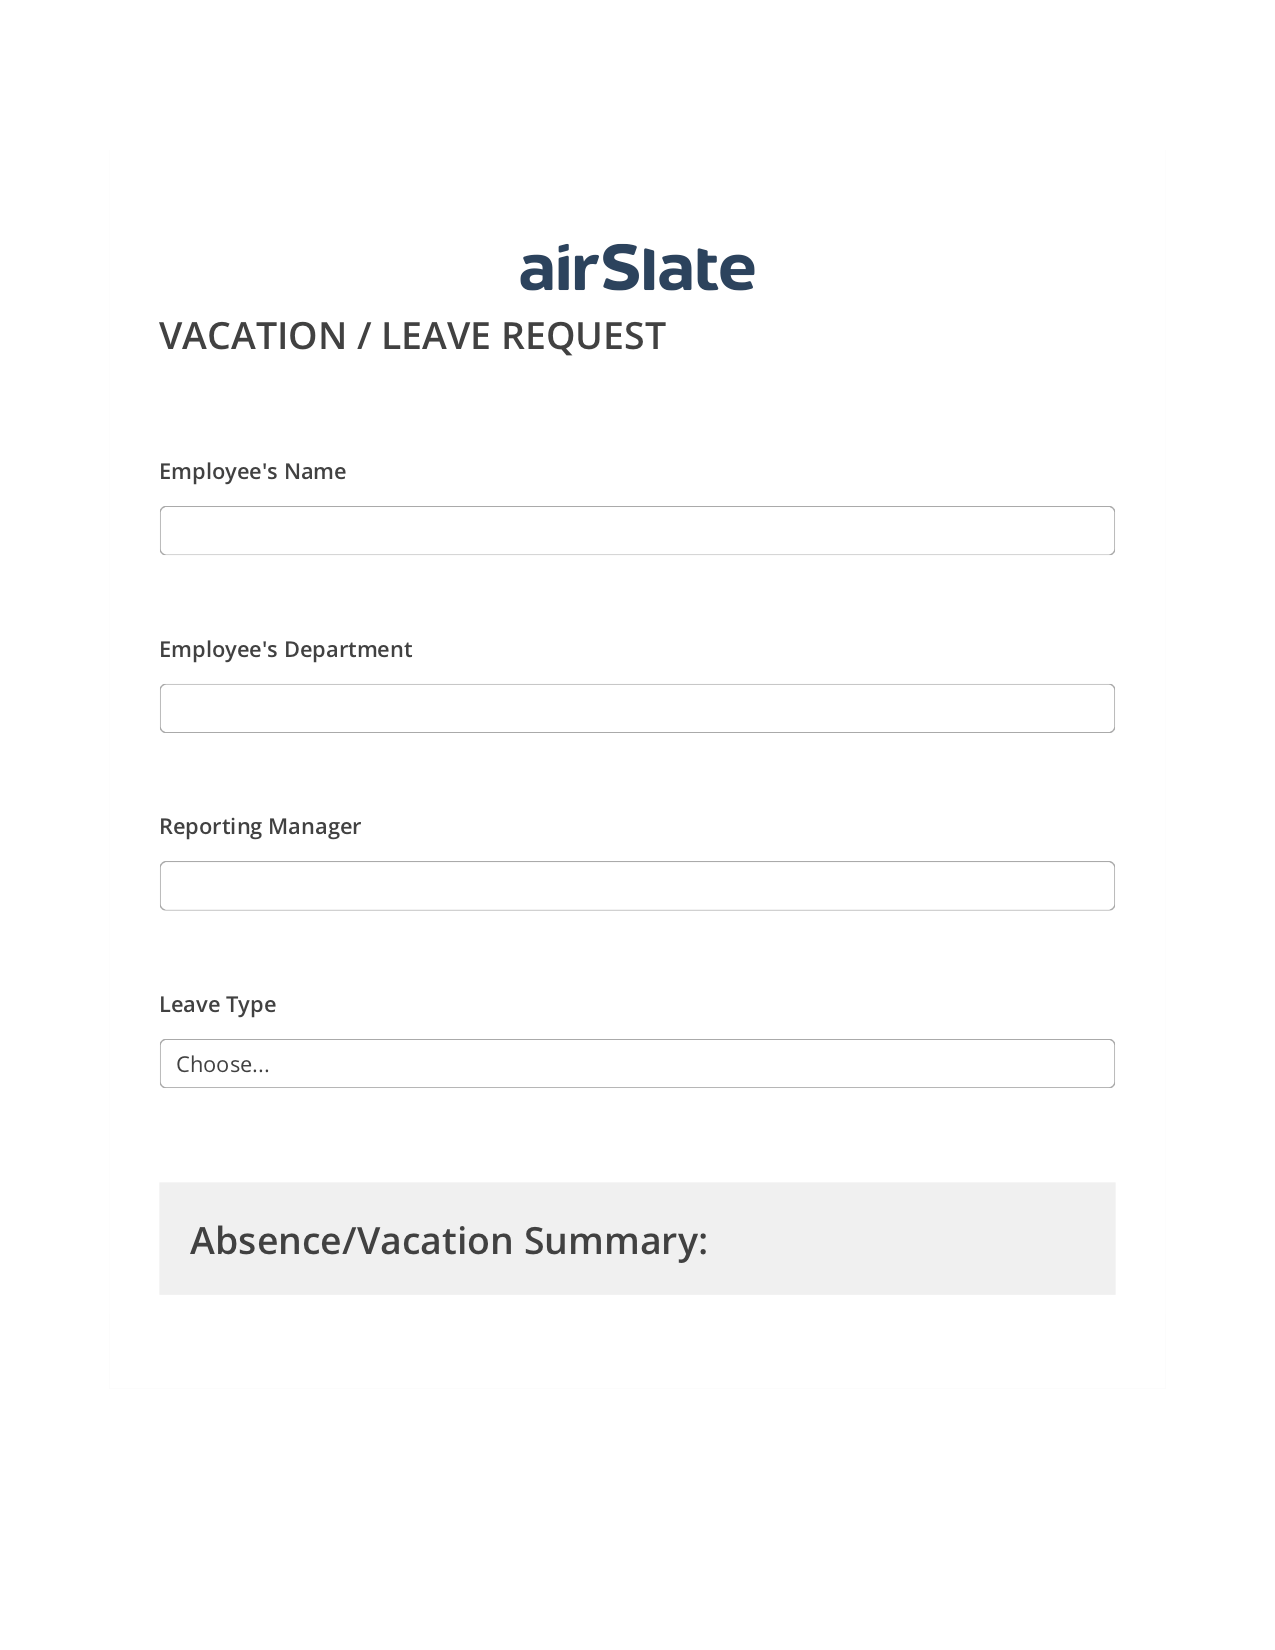 Vacation/Leave Request Workflow Pre-fill from CSV File Bot, Remove Slate Bot, Export to Google Sheet Bot